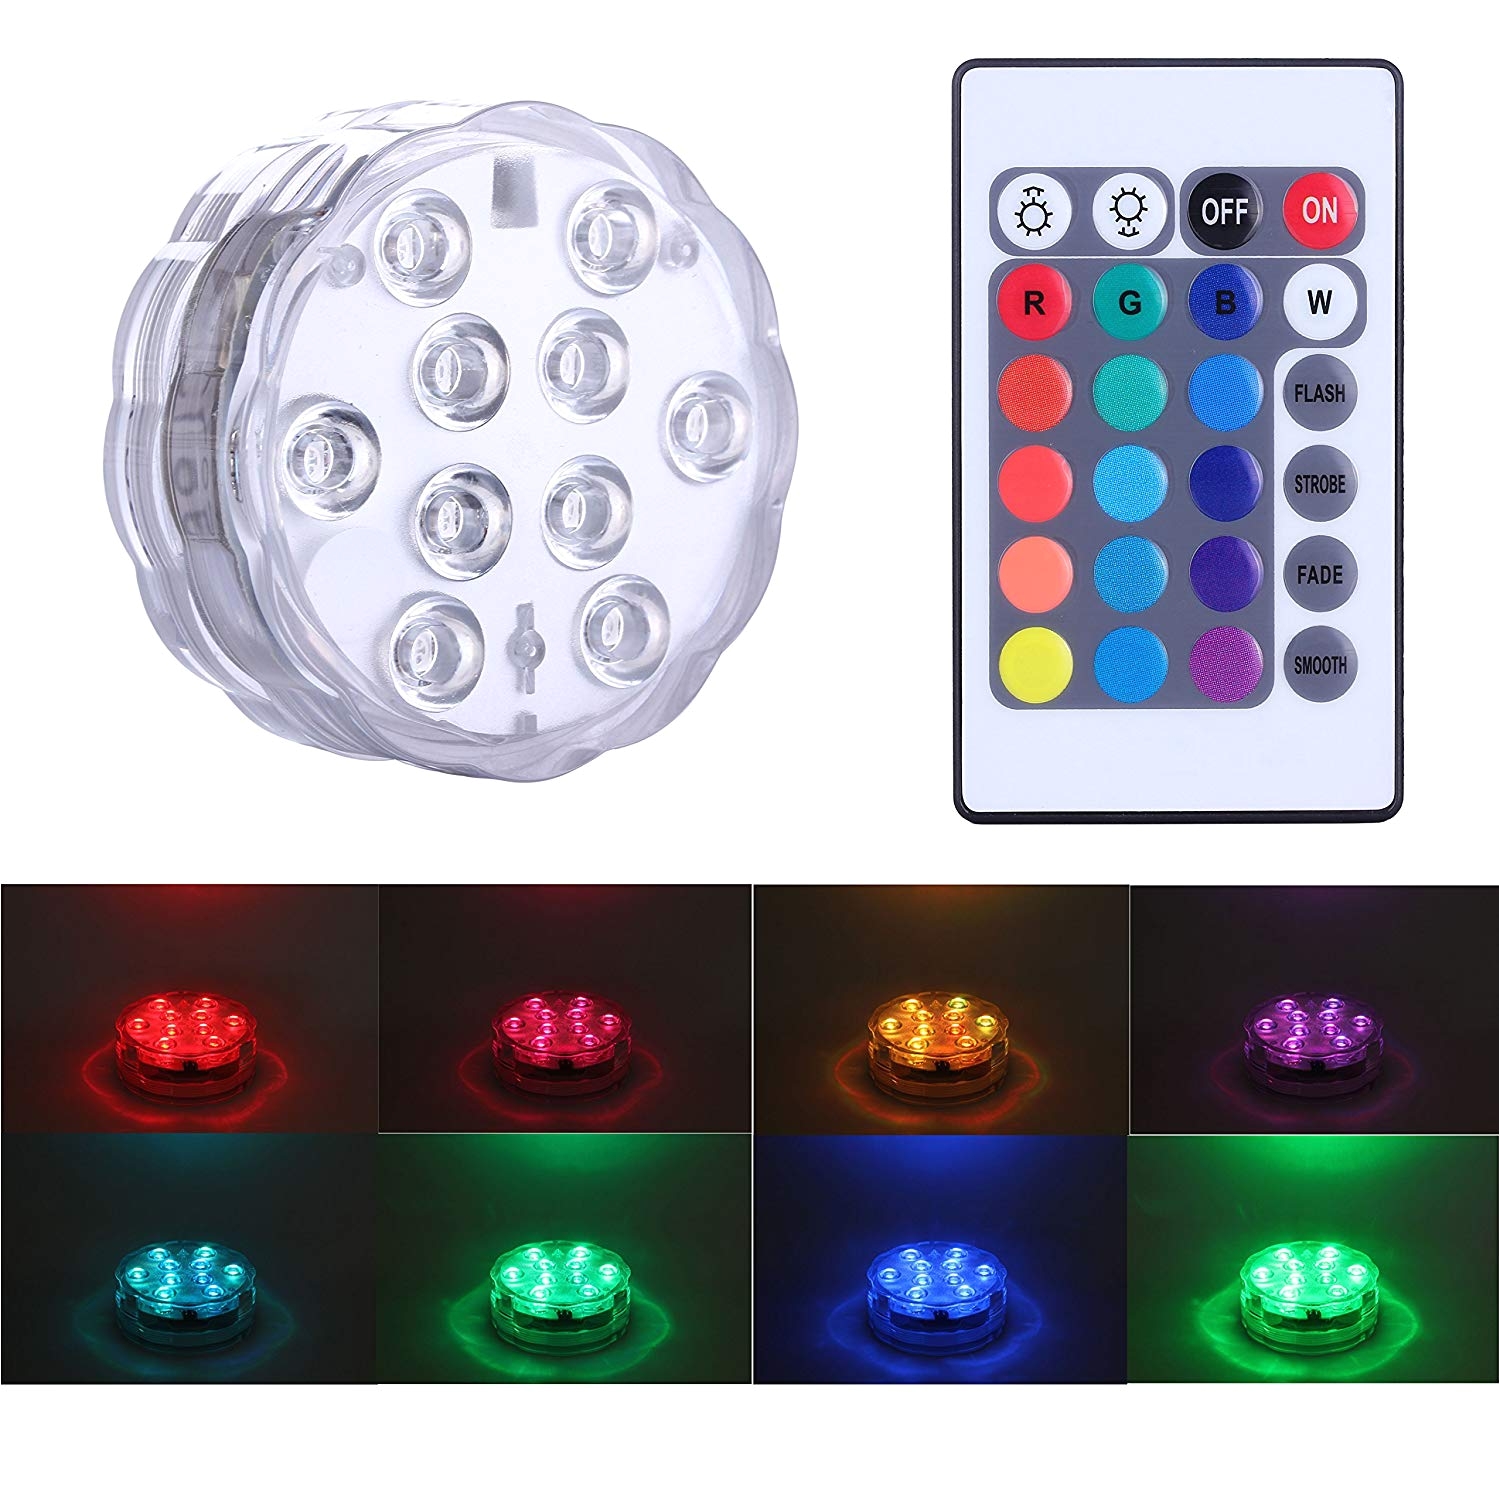 this remote controlled submersible led light is a very good light source with variety colors for creating atmospheres as you wish